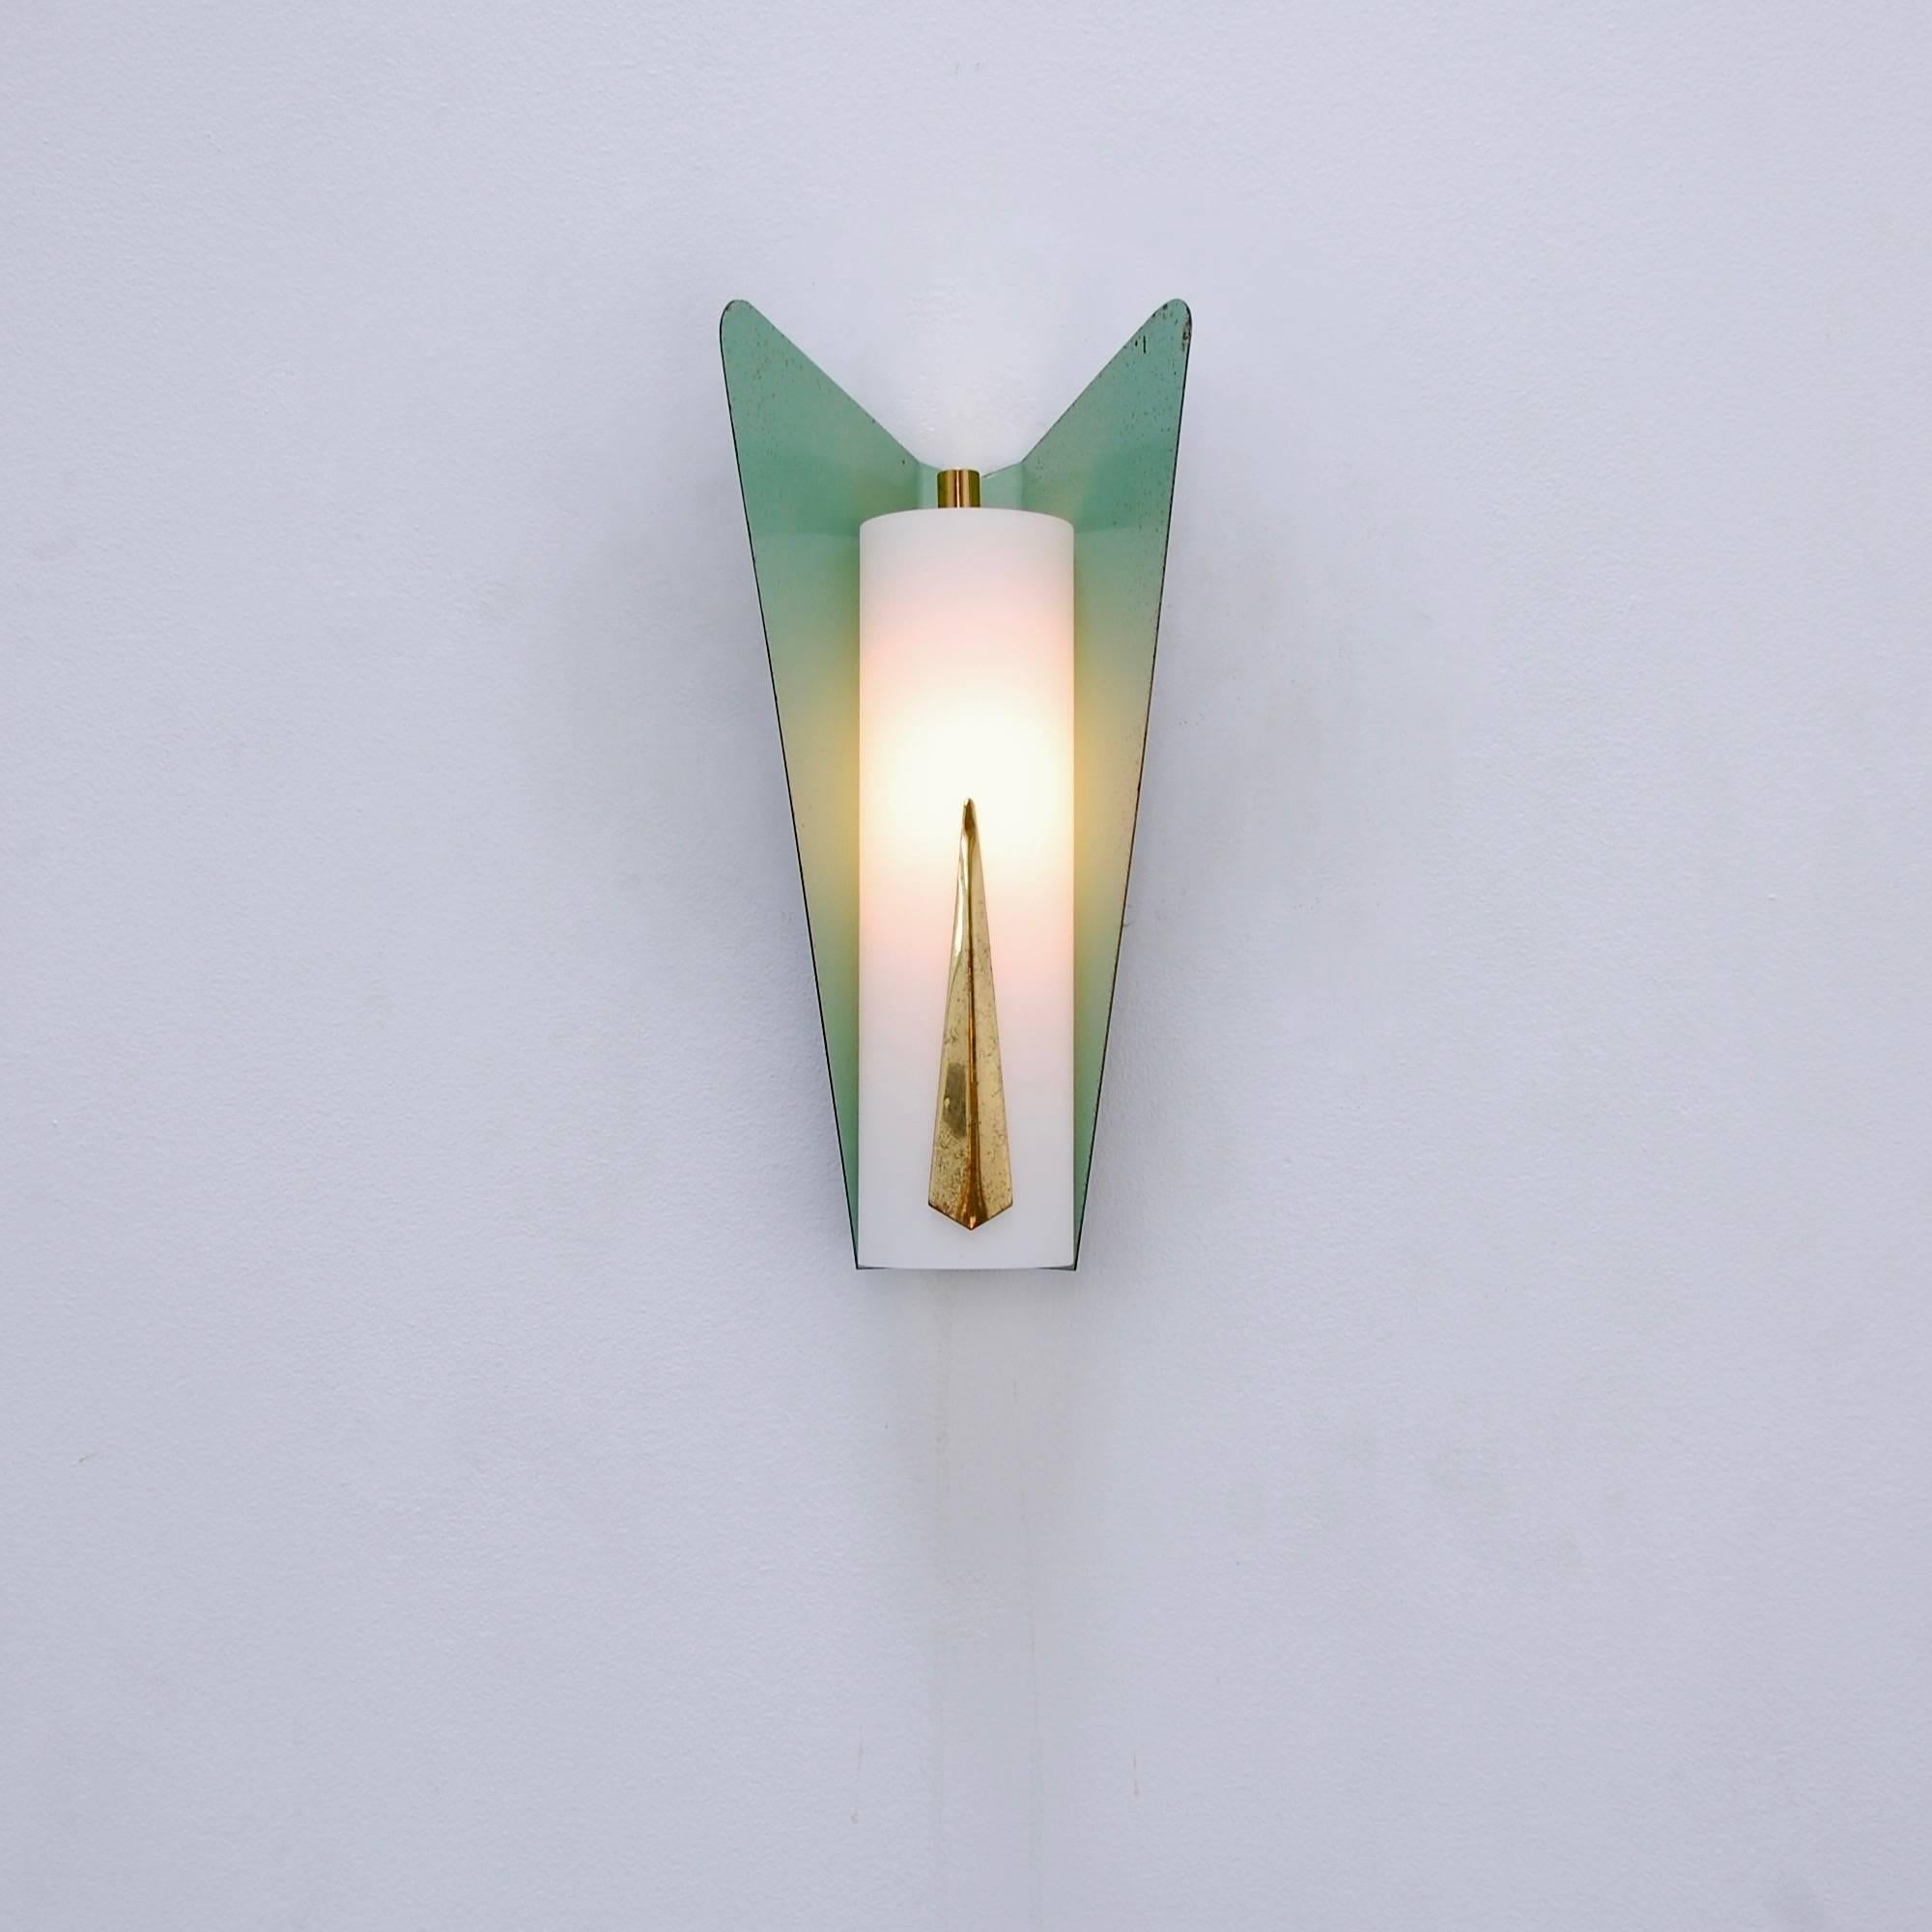 Pair of fantastic midcentury butterfly sconces from Italy, with original finish, green and black palate of painted steel or aluminum, brass and glass. Single E12 based socket per sconce. Maximum wattage 75 watts per sconce. Back plate has 2 ¾”